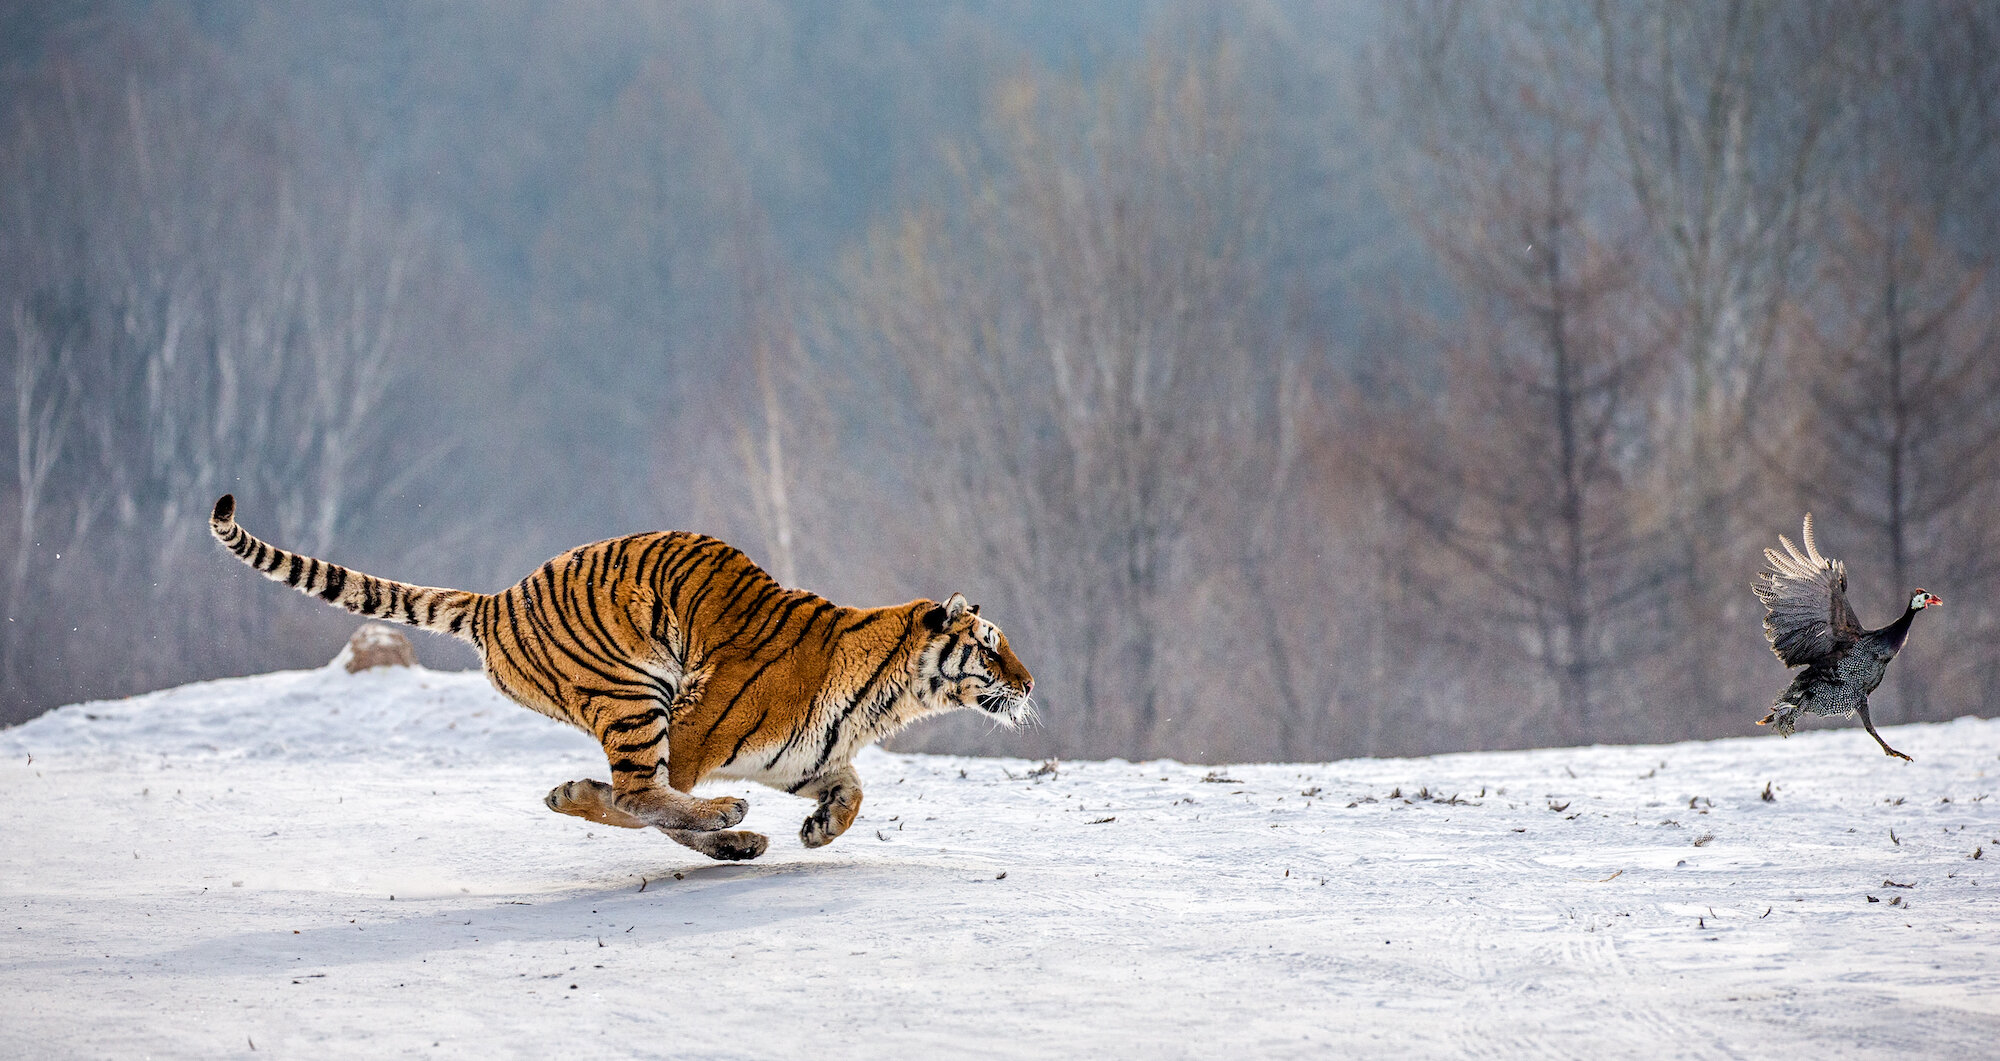 Save the Tiger! How to Help Wild Tigers